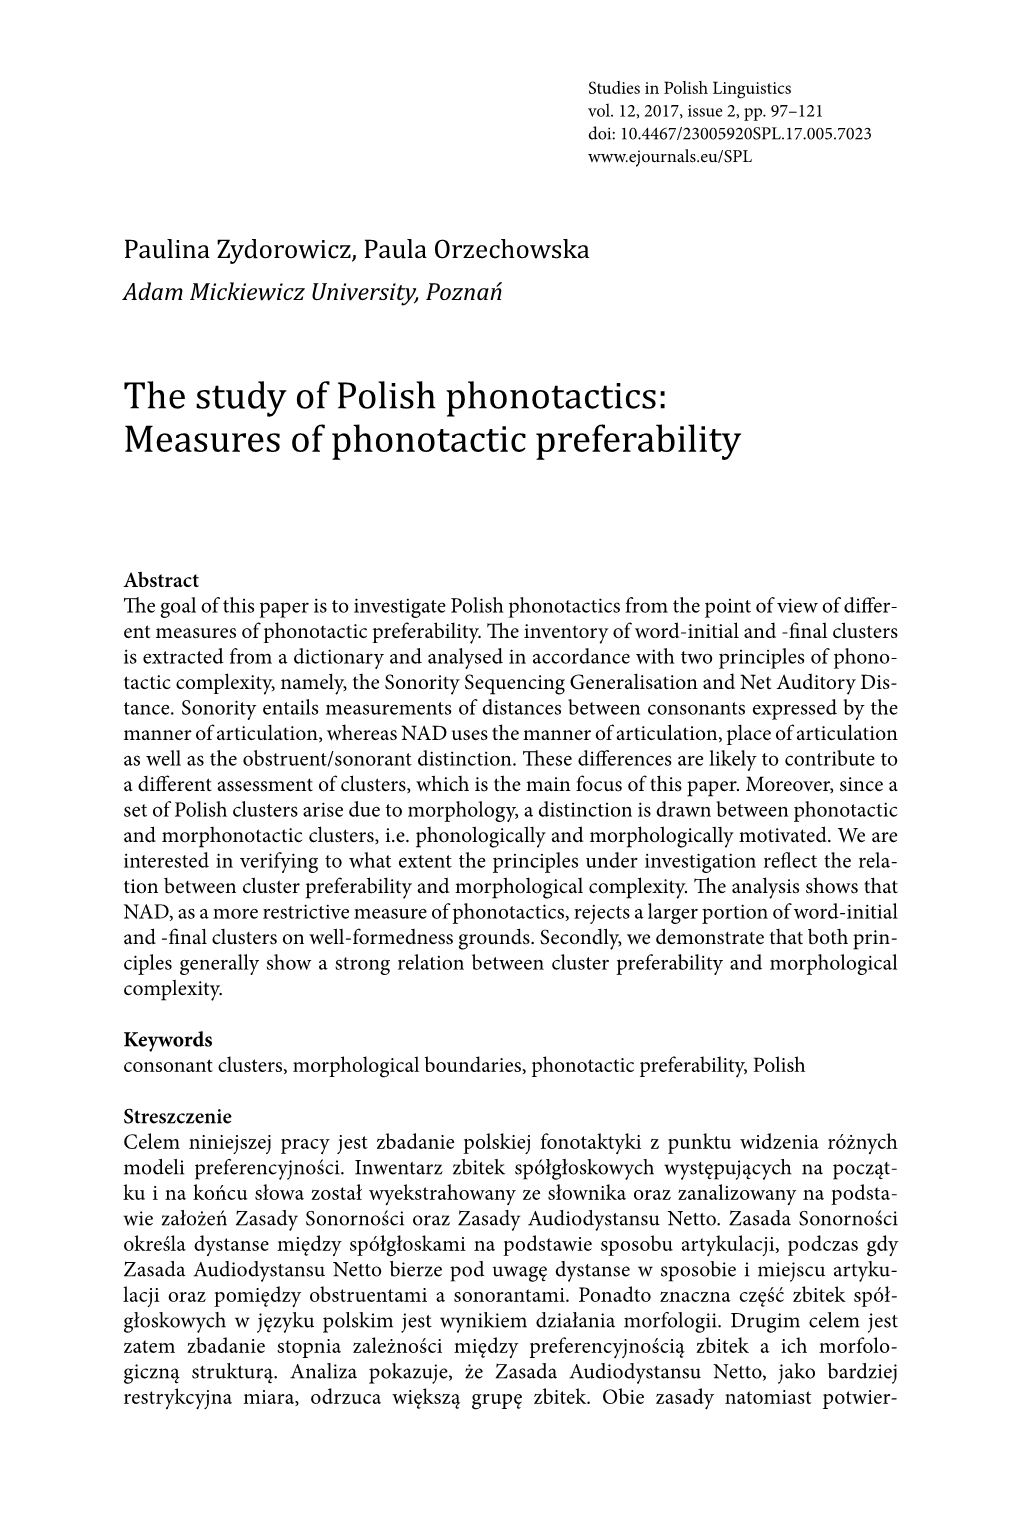 The Study of Polish Phonotactics: Measures of Phonotactic Preferability